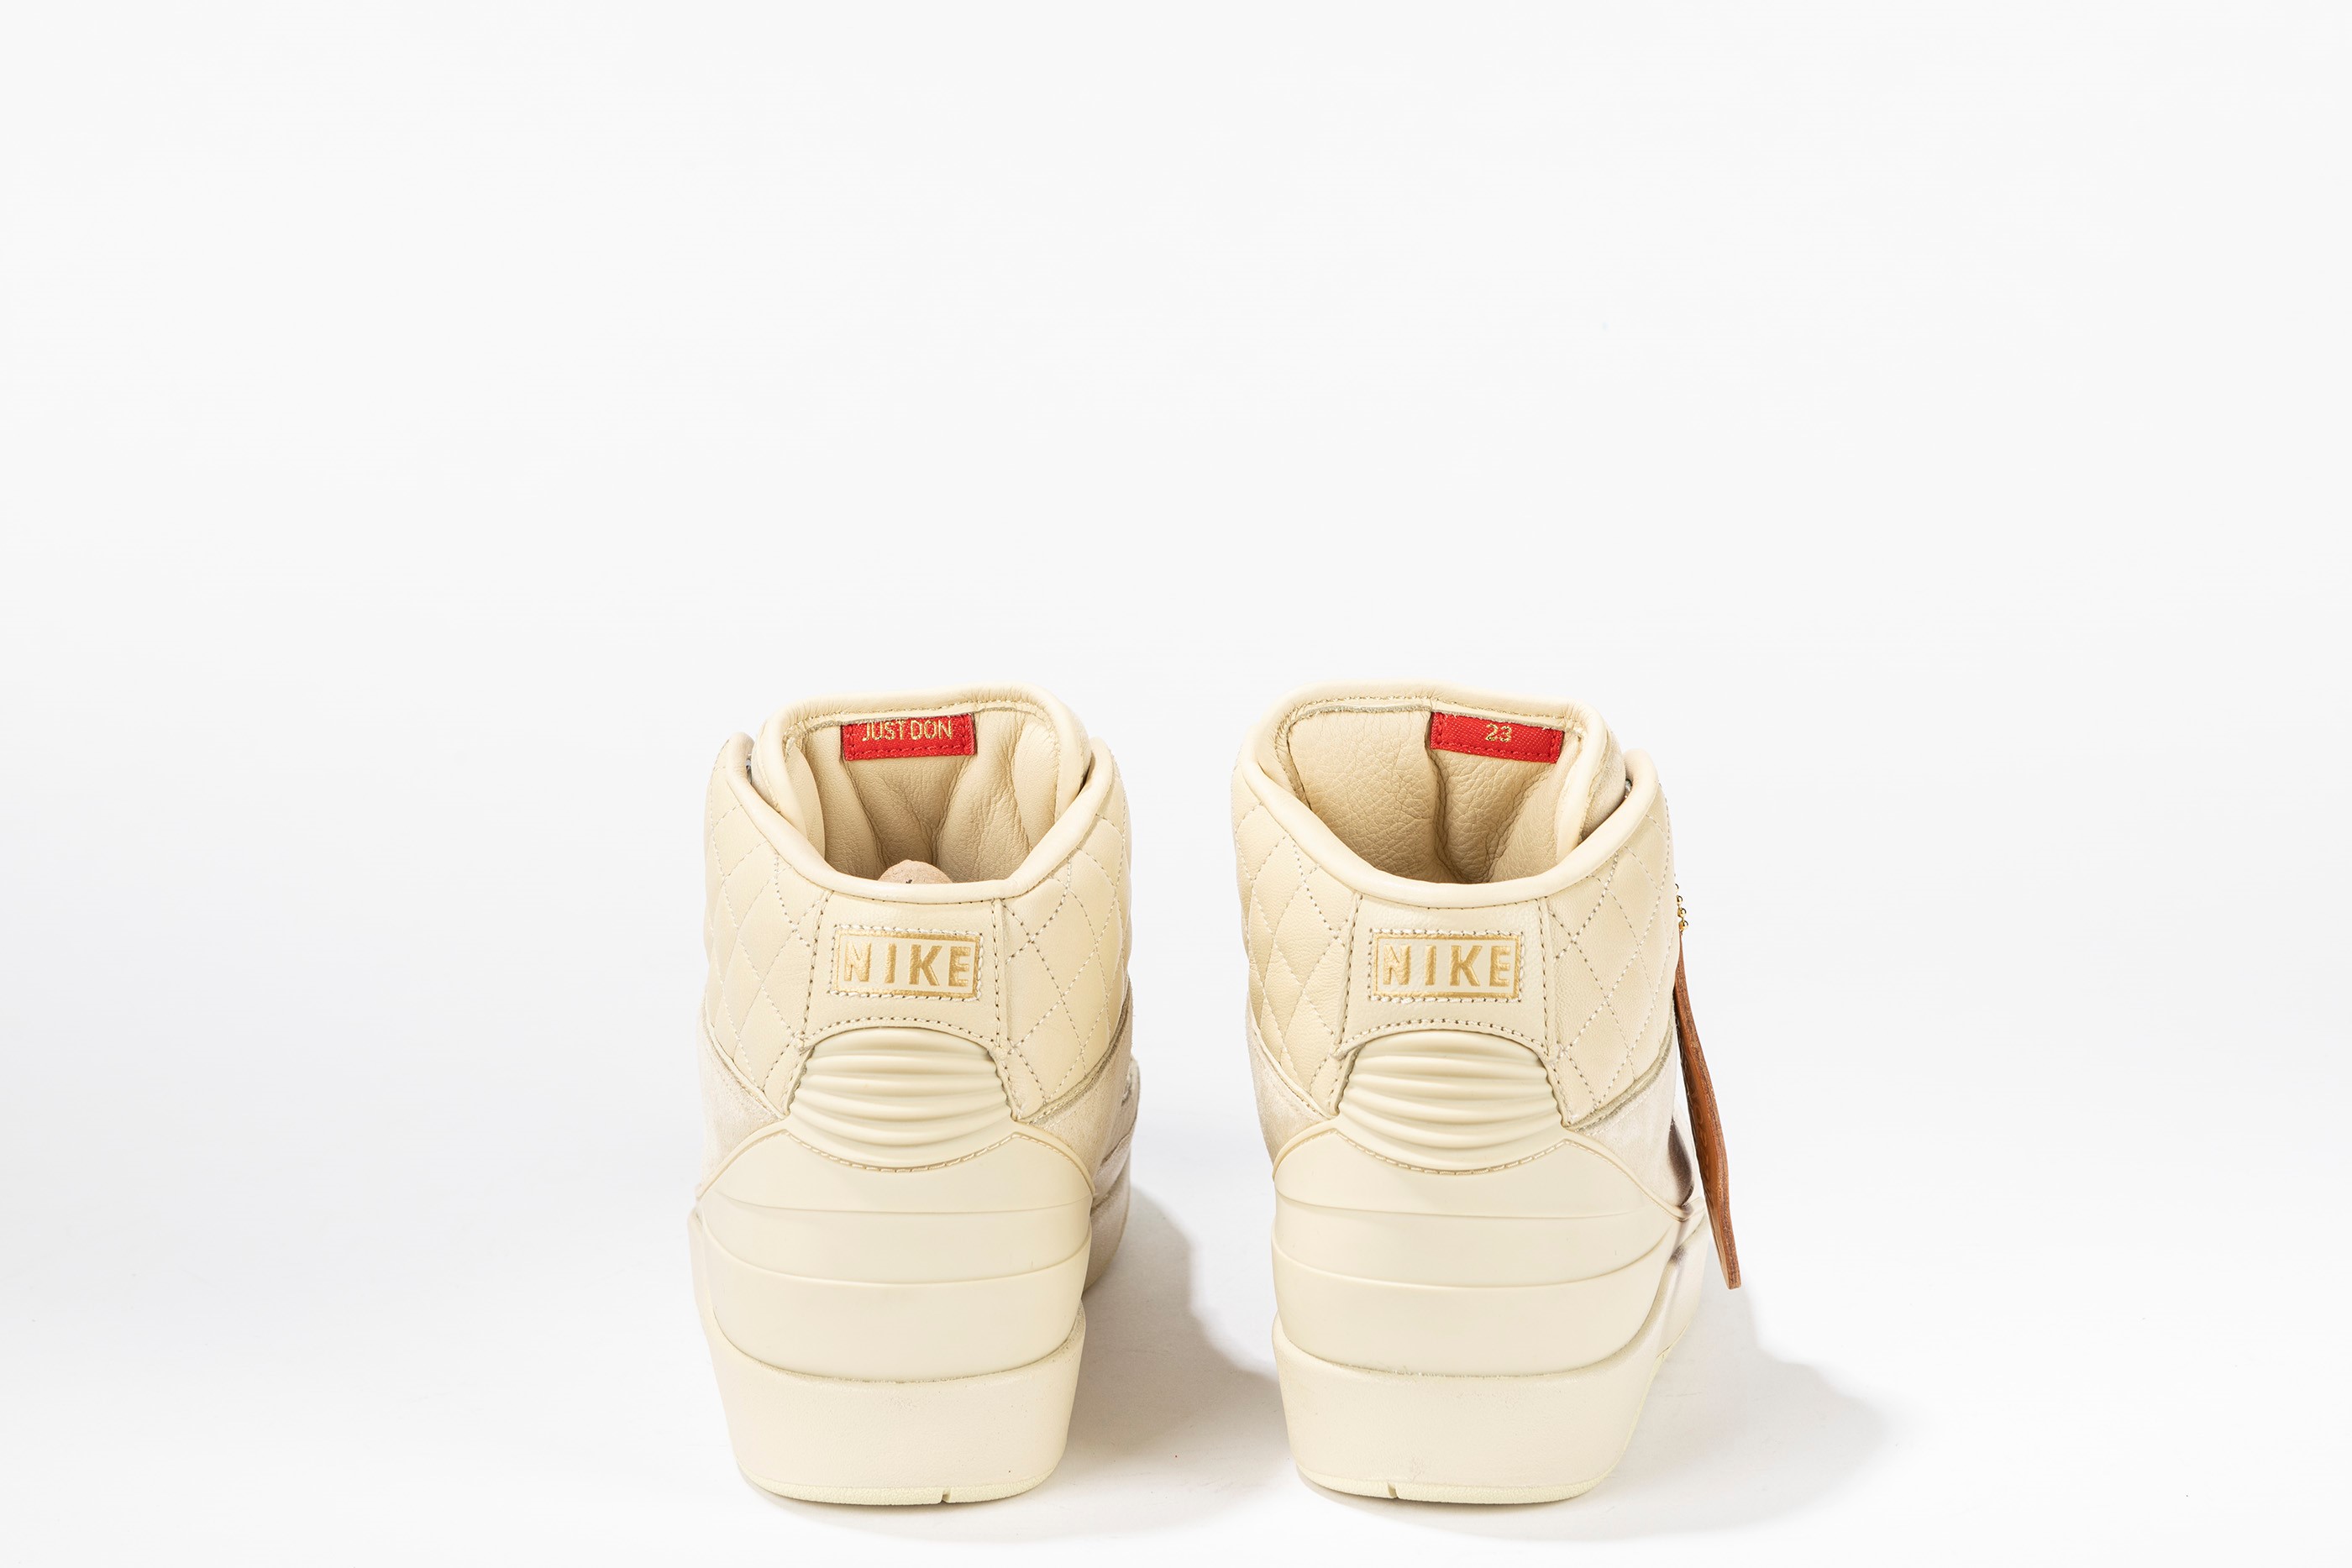 NIKE : Jordan 2 Retro Just Don Beach “Special Box with Leather Cap 